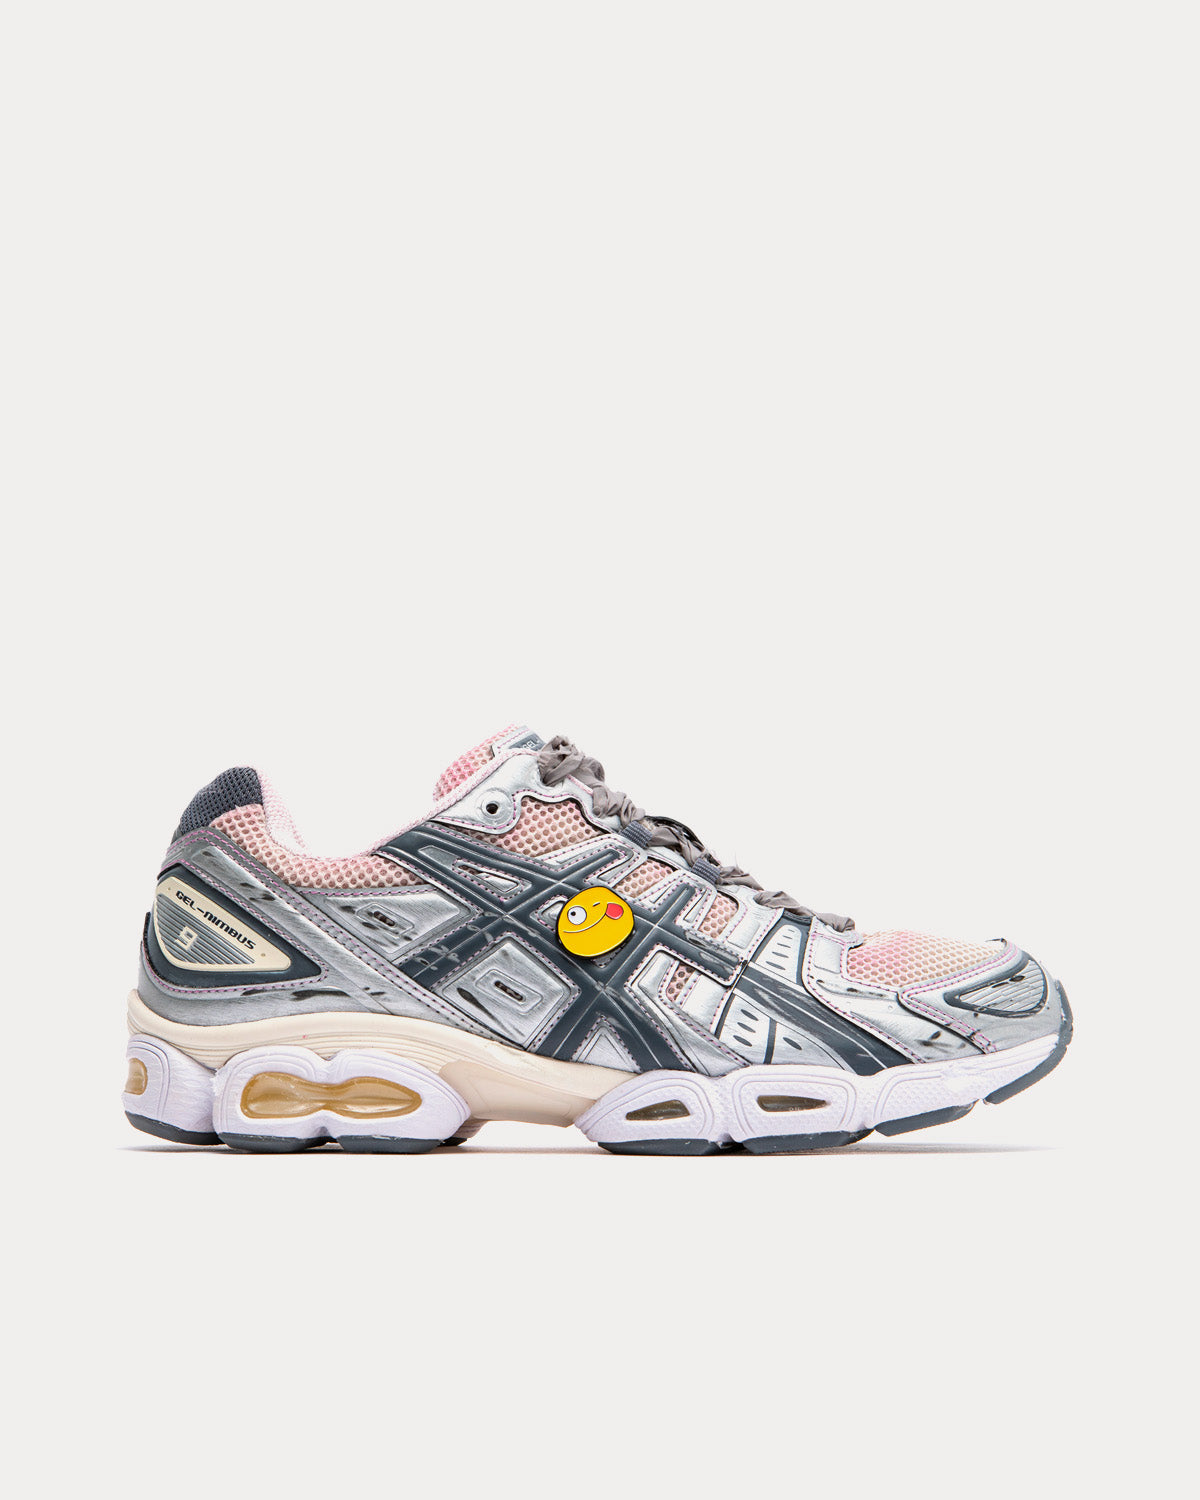 Asics x (di)vision - GEL-Nimbus 9 Grey / Winestained / Silver Low Top Sneakers